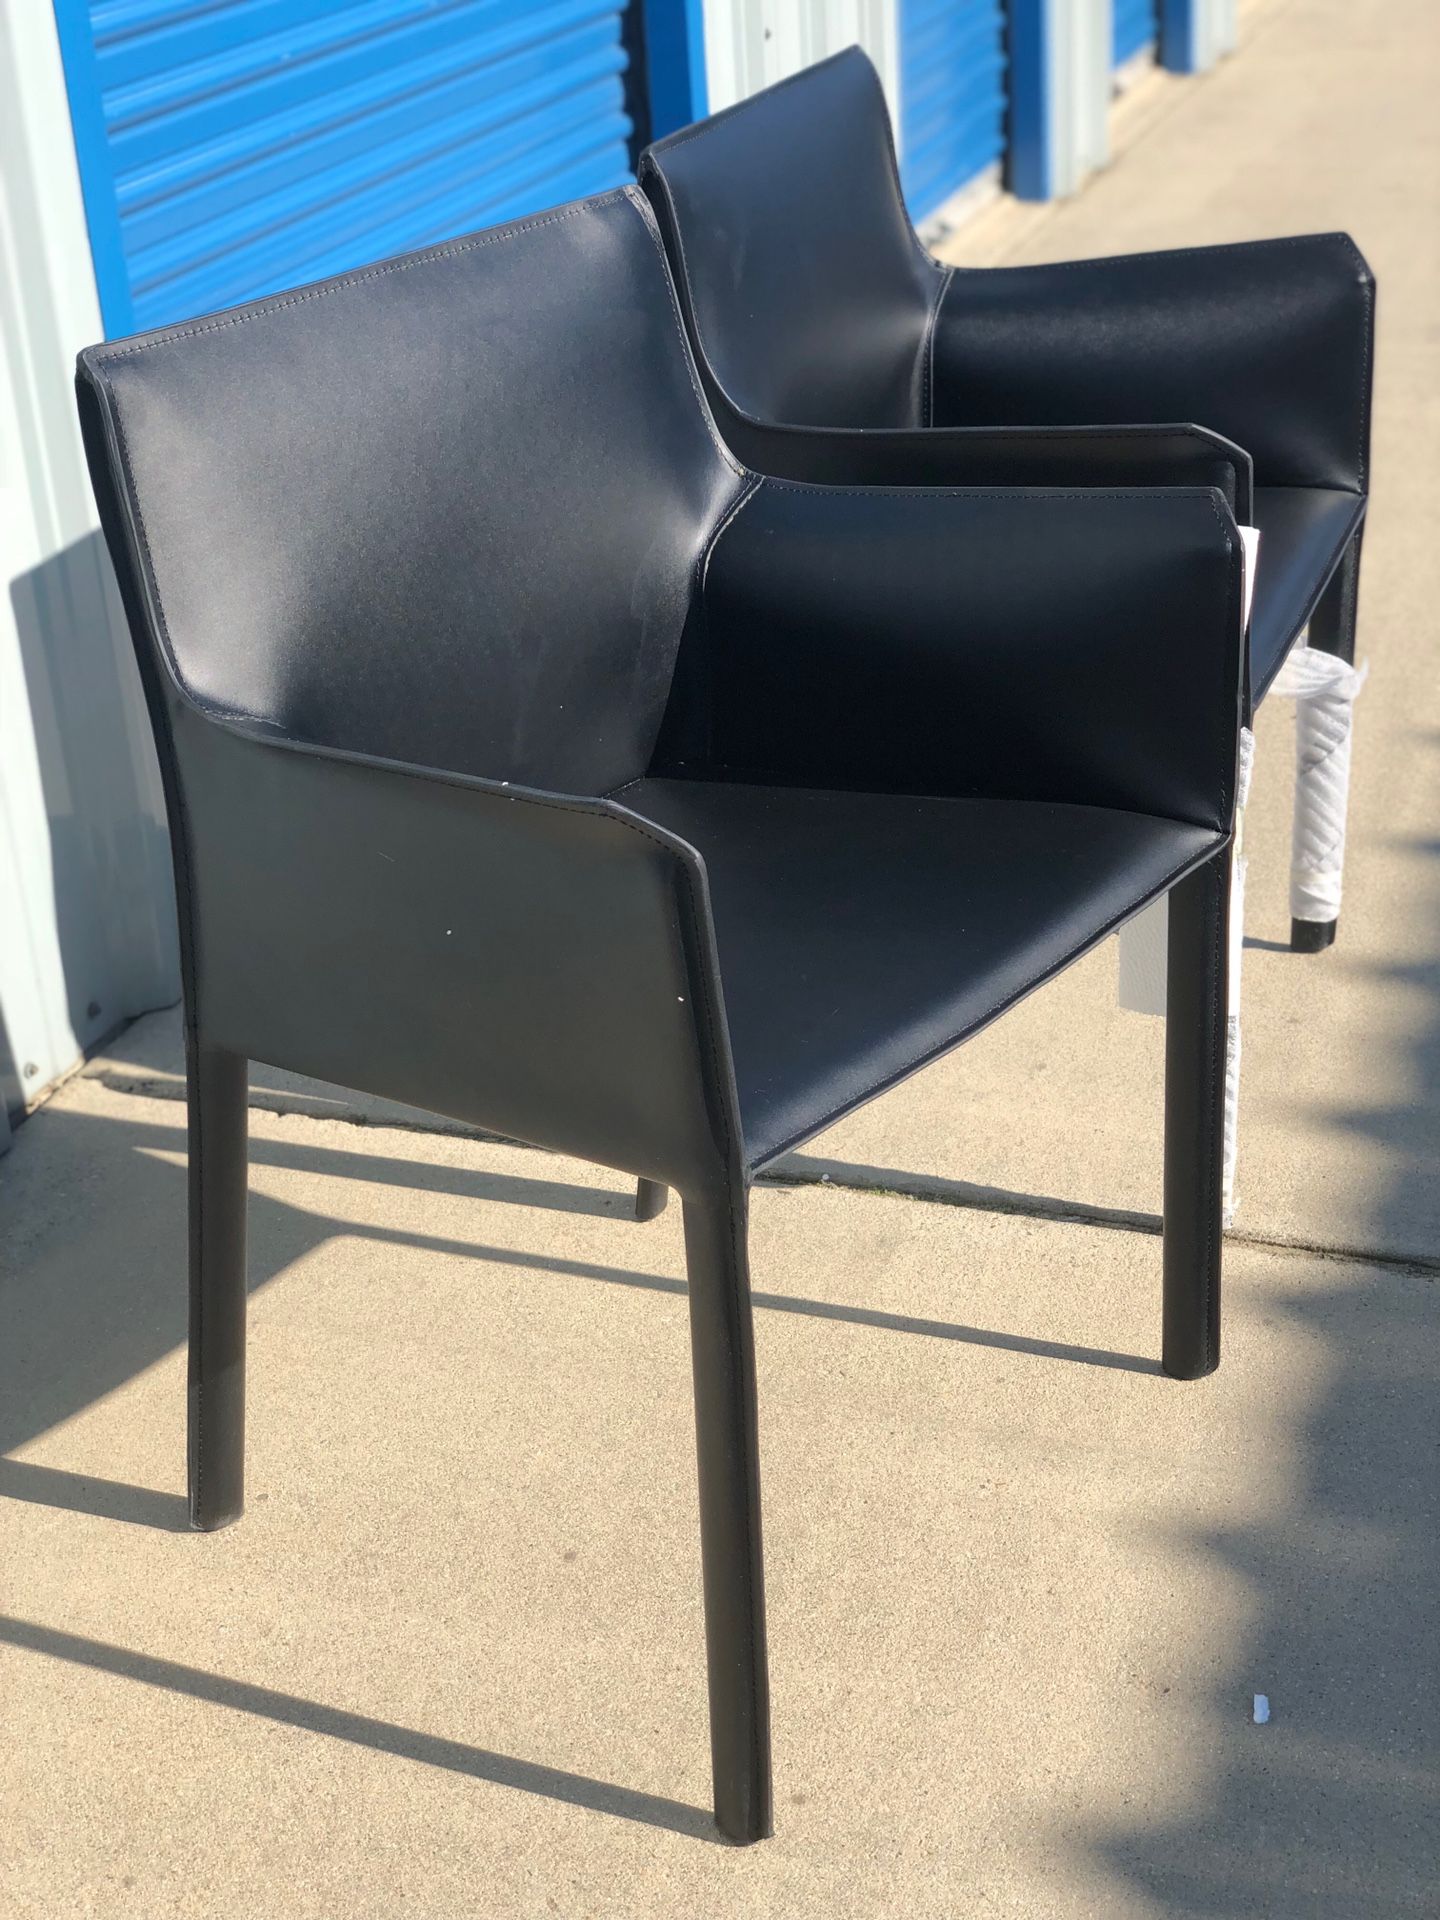 Brand new set of 2 black leather arm chairs. Retails for over $450